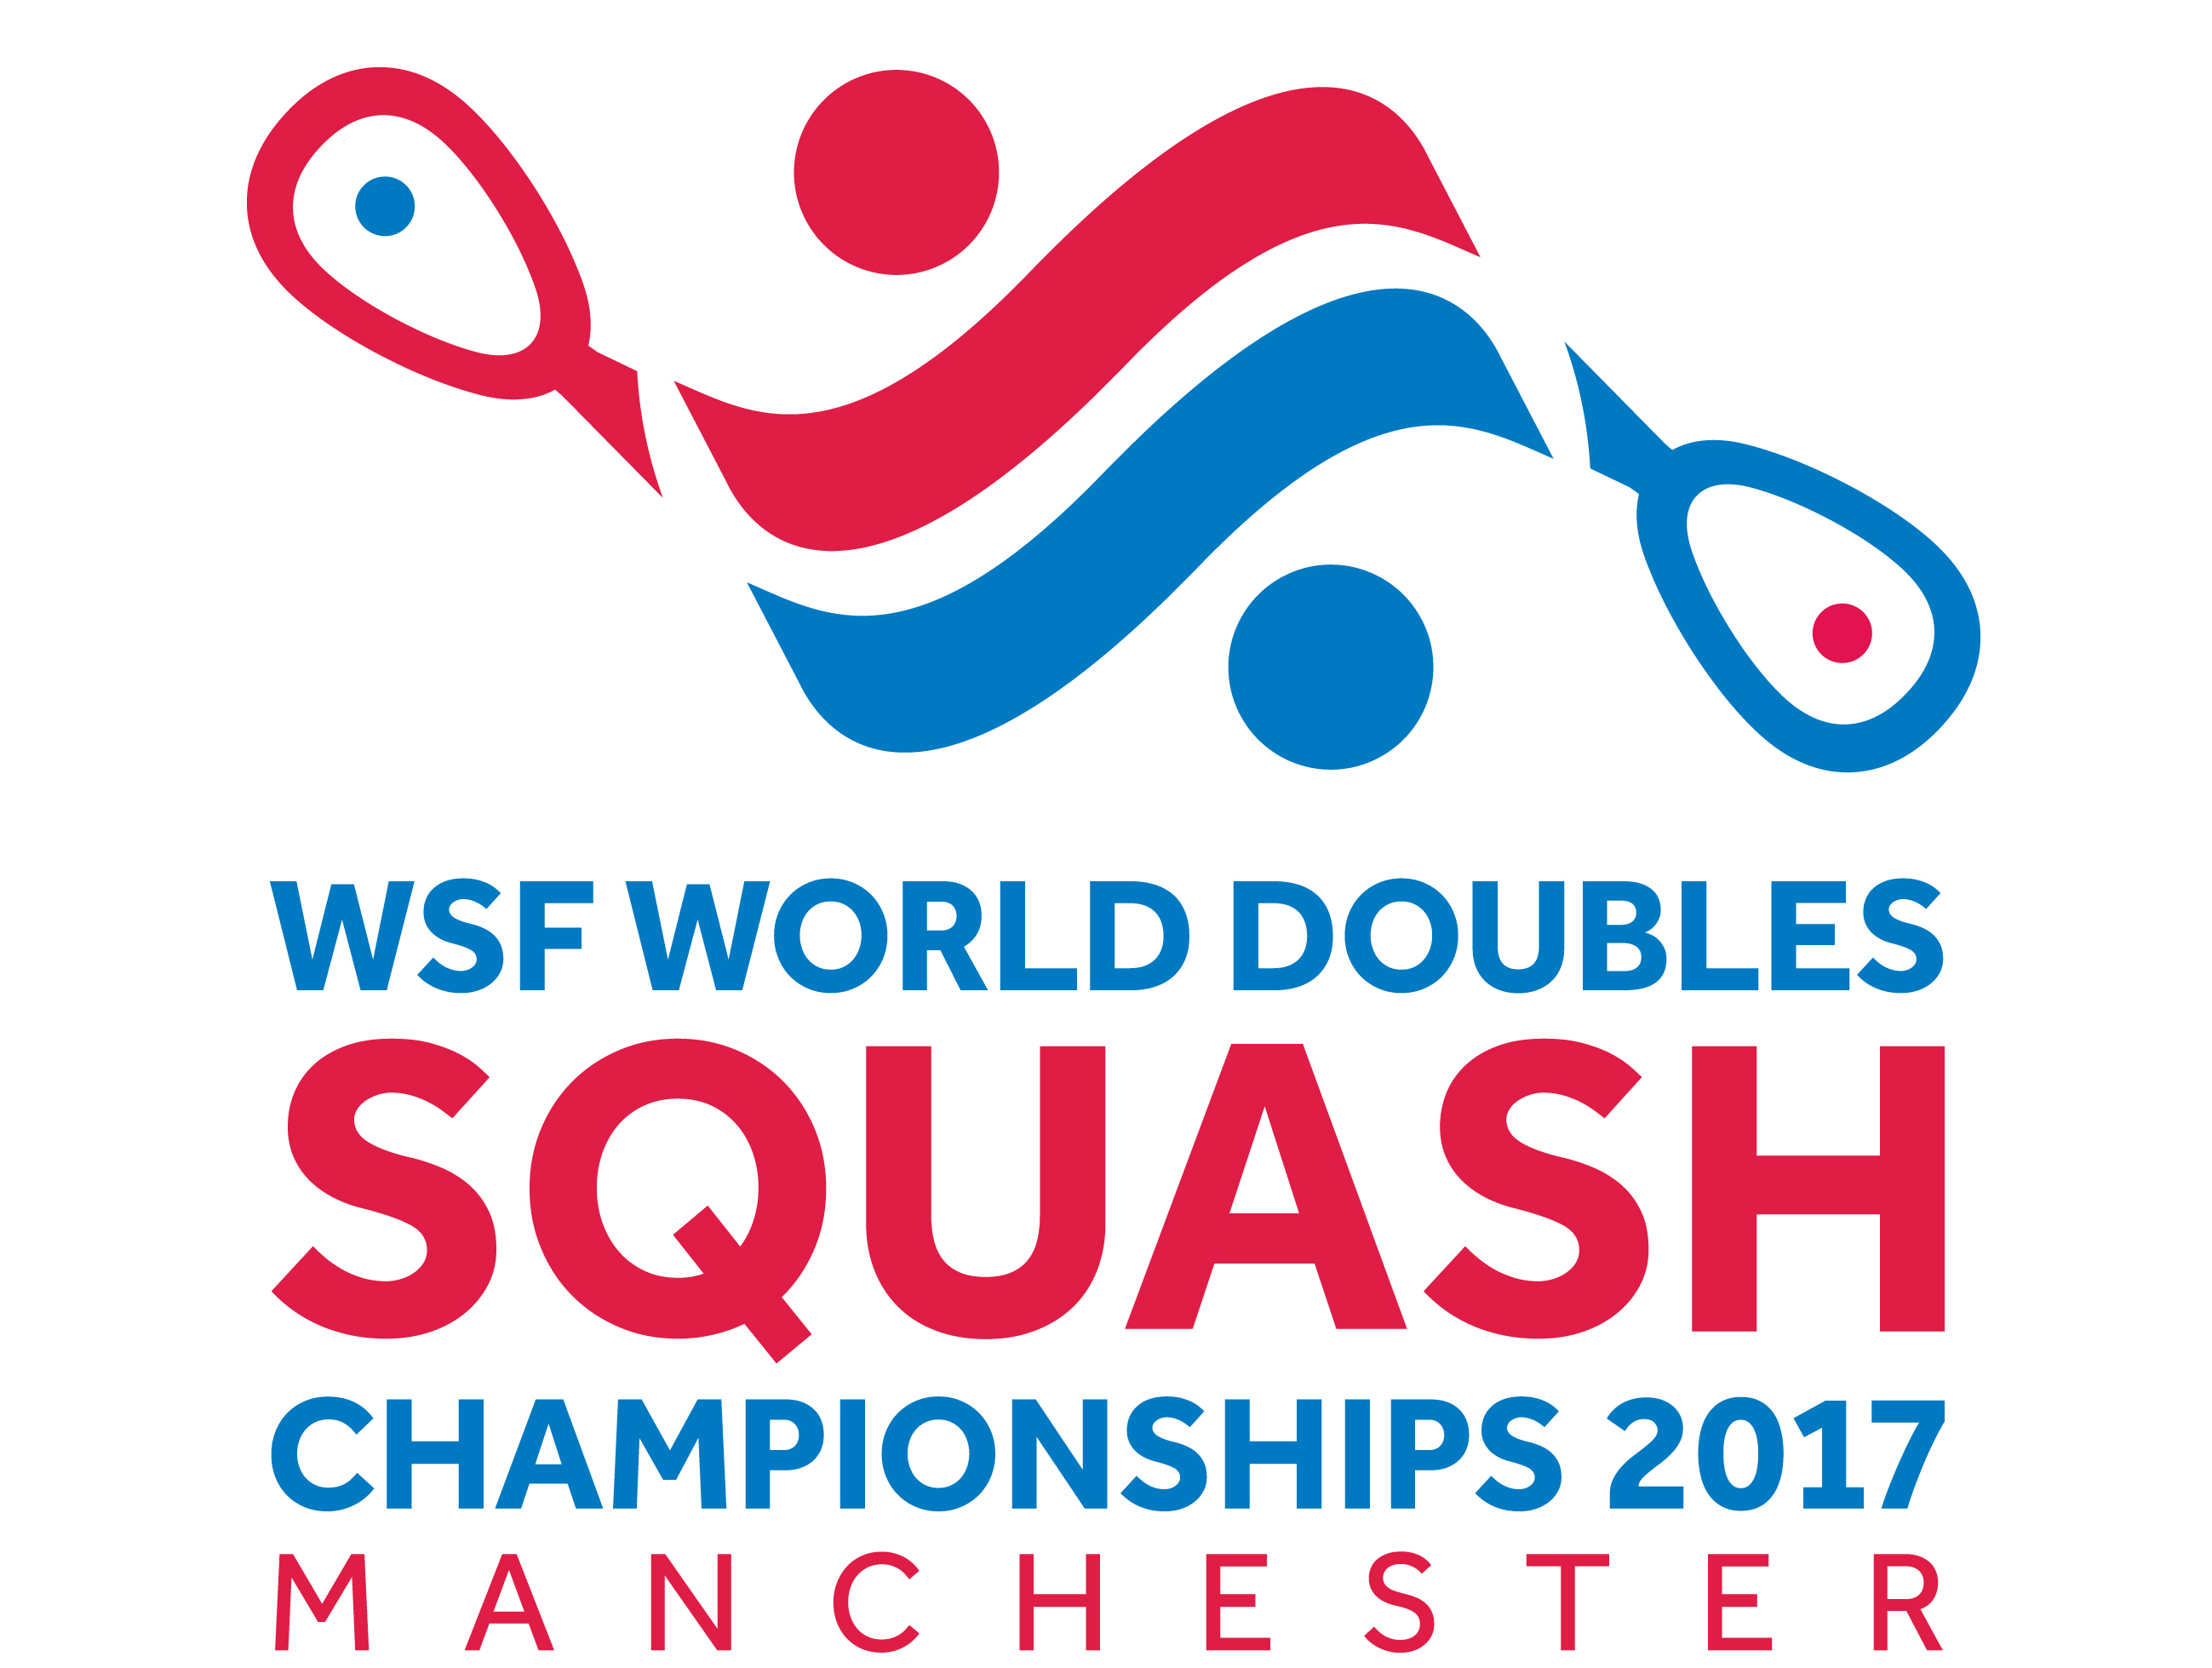 The WSF World Doubles Championships are set to be held at the National Squash Centre in Manchester